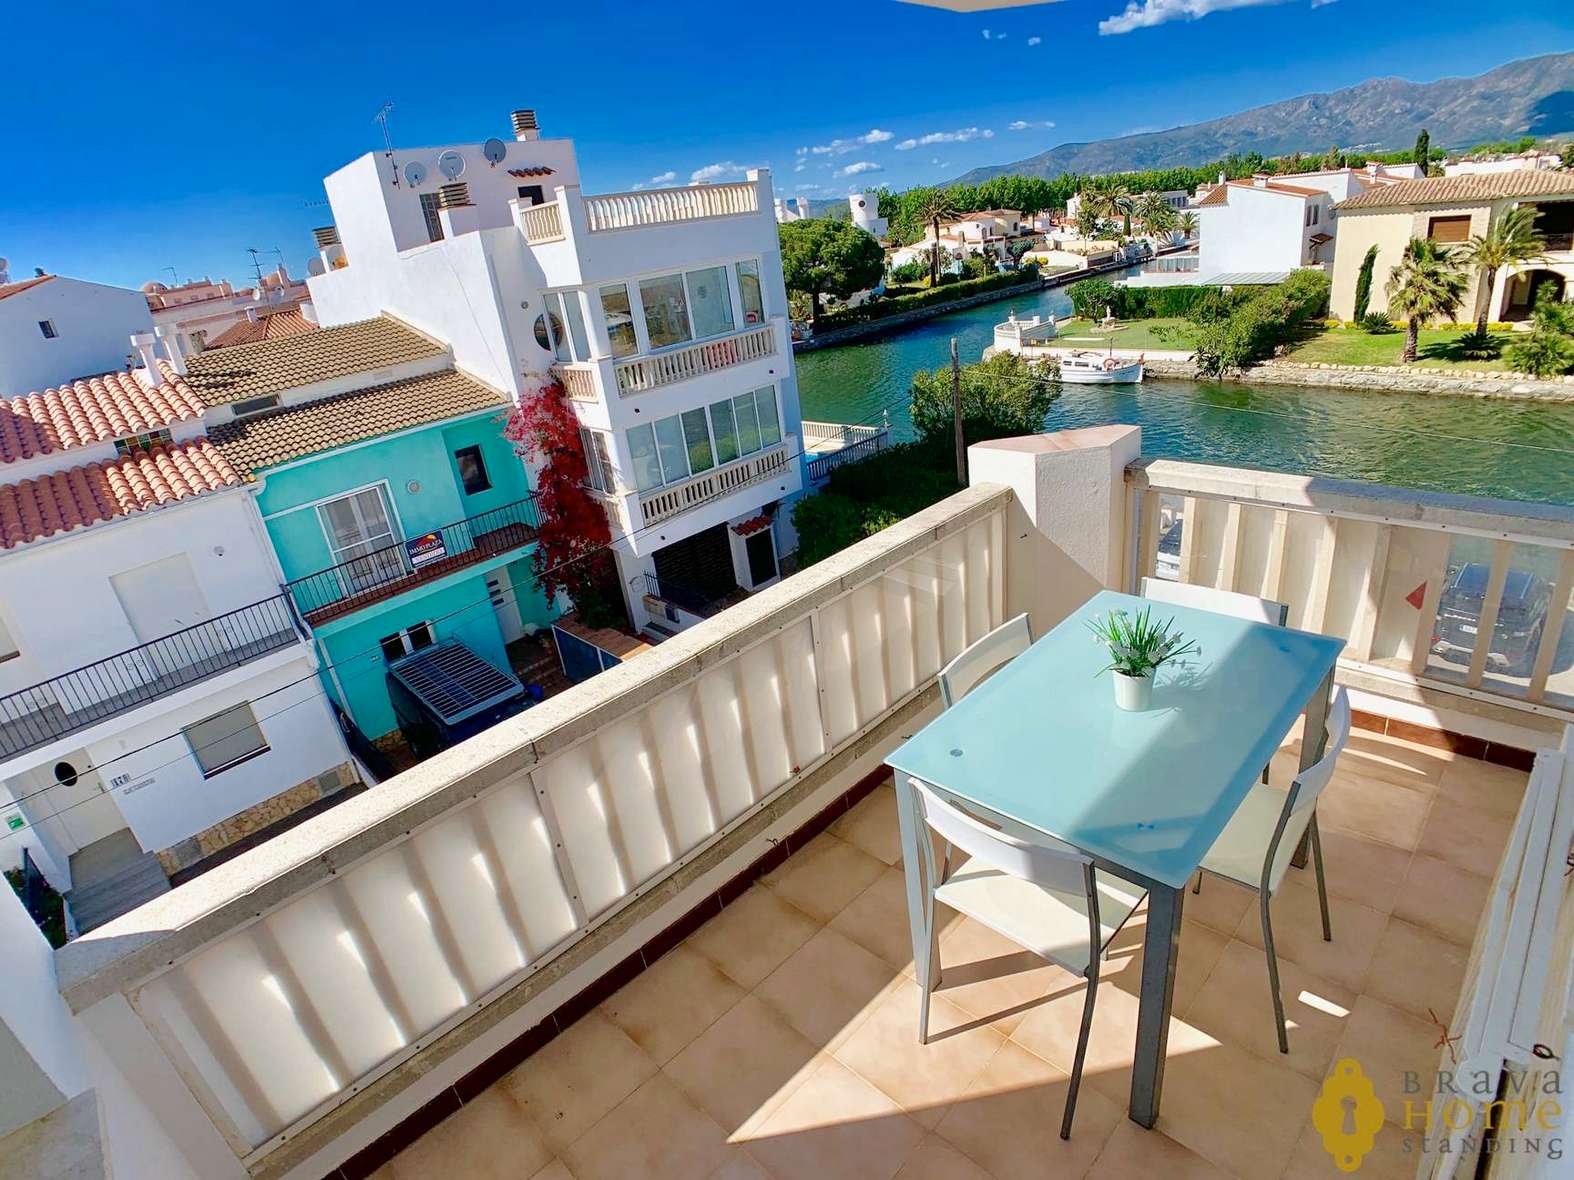 Very nice apartment with stunning views of the canal and the Pyrenees